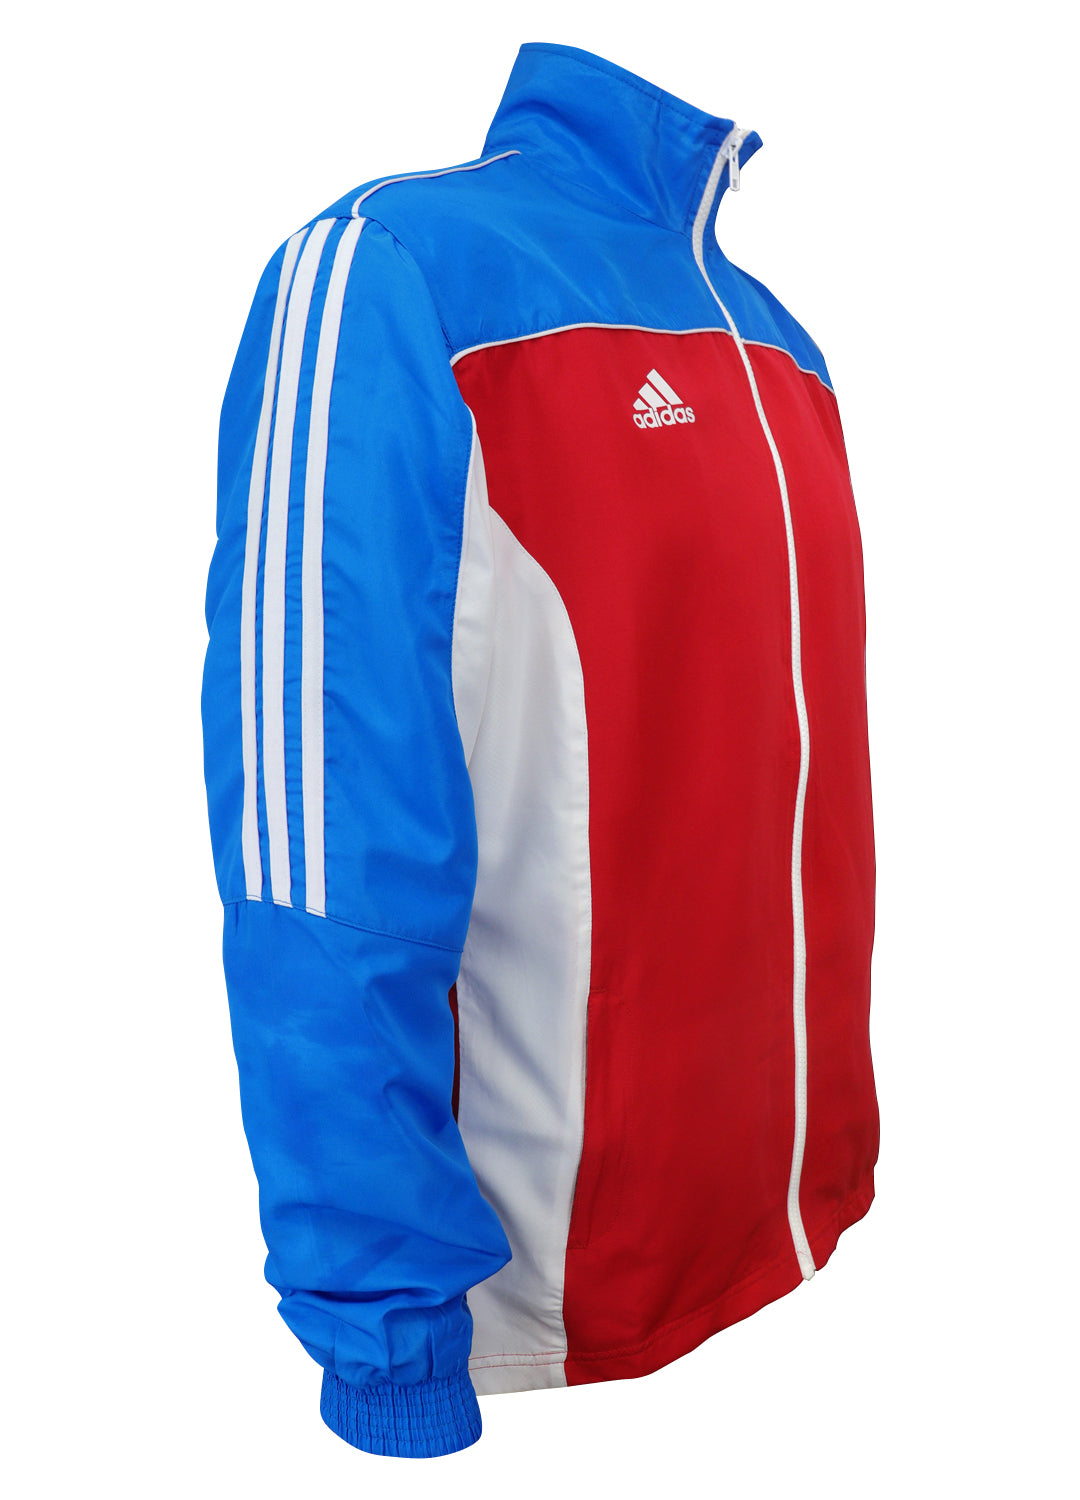 adidas Red White Blue Windbreaker Style Team Jacket Side View